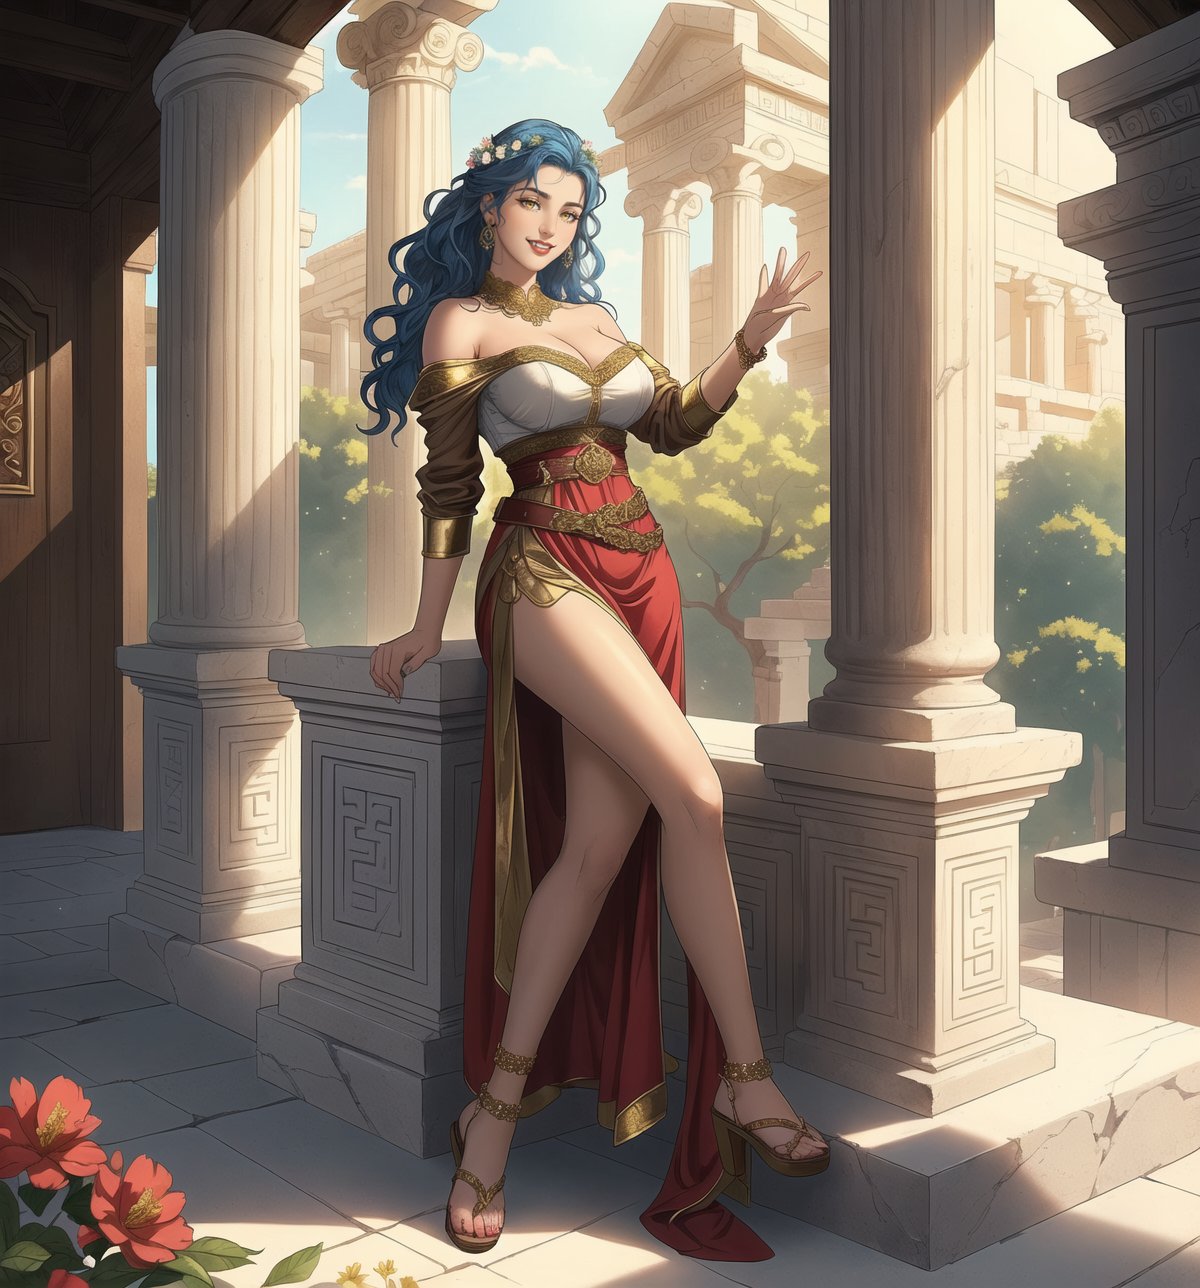 An ultra-detailed 16K masterpiece with classic and mythological styles, rendered in ultra-high resolution with stunning graphical detail. | Sofia, a 27-year-old woman, is dressed in a Greek woman's costume, consisting of a white linen tunic with gold details and a brown leather belt. She is also wearing brown leather sandals and a wreath of flowers and olive leaves in her blue hair. Her hair is long and wavy, falling gently over her shoulders. She has yellow eyes, looking at the viewer while smiling seductively, showing her teeth and wearing red lipstick. It is located in an ancient Greek temple, with structures of white marble, wood and rock. The scene is lit by sunlight, creating soft shadows on the walls. There are figurines of ancient gods scattered around the place, creating a welcoming and mystical atmosphere. | The image highlights Sofia's sensual figure and the architectural elements of the ancient Greek temple. The white marble, wood and rock structures, together with Sofia, the figurines and the flowers, create a mystical and seductive environment. Sunlight illuminates the scene, creating soft shadows and highlighting the details of the scene. | Soft, warm lighting effects create a sensual and mystical atmosphere, while detailed textures on Sofia's structures and clothing add realism to the image. | A sensual and mystical scene of a Greek woman in an ancient temple, fusing elements of classical and mythological art. | (((The image reveals a full-body shot as Sofia assumes a sensual pose, engagingly leaning against a structure within the scene in an exciting manner. She takes on a sensual pose as she interacts, boldly leaning on a structure, leaning back and rubbing against the structure, reclining in an exciting way.))). | ((((full-body shot)))), ((perfect pose)), ((perfect fingers, better hands, perfect hands)), ((perfect legs, perfect feet)), ((huge breasts)), ((perfect design)), ((perfect composition)), ((very detailed scene, very detailed background, perfect layout, correct imperfections)), More Detail, Enhance